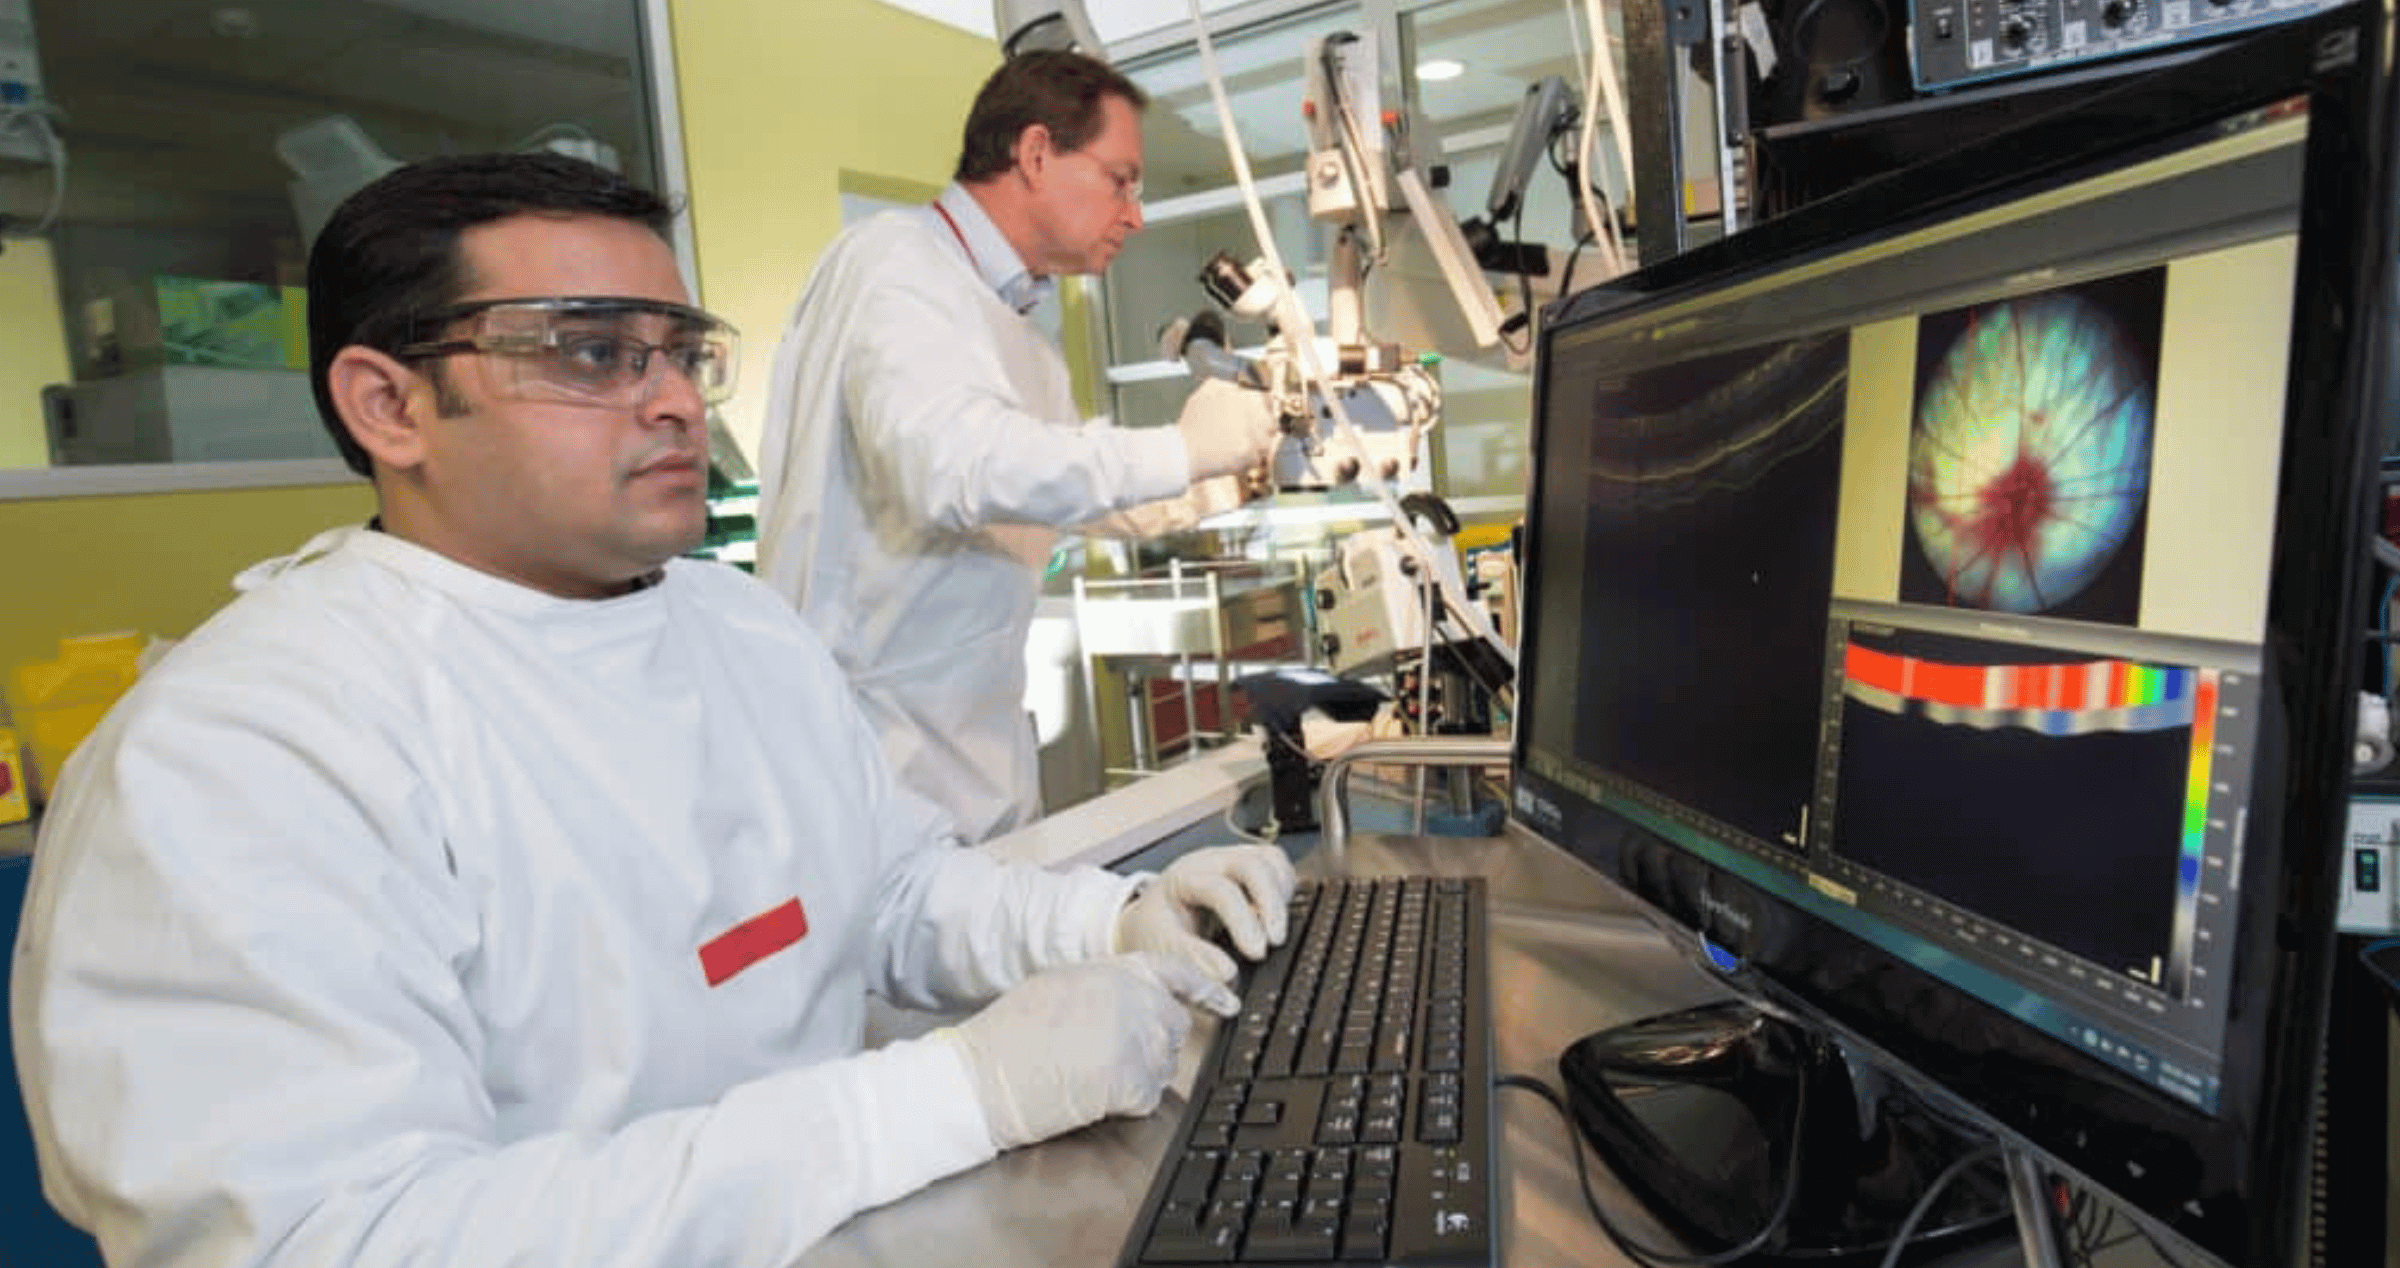 Macquarie ophthalmology researchers Dr Nitin Chitranshi (seated) and Professor Stuart Graham working in a lab